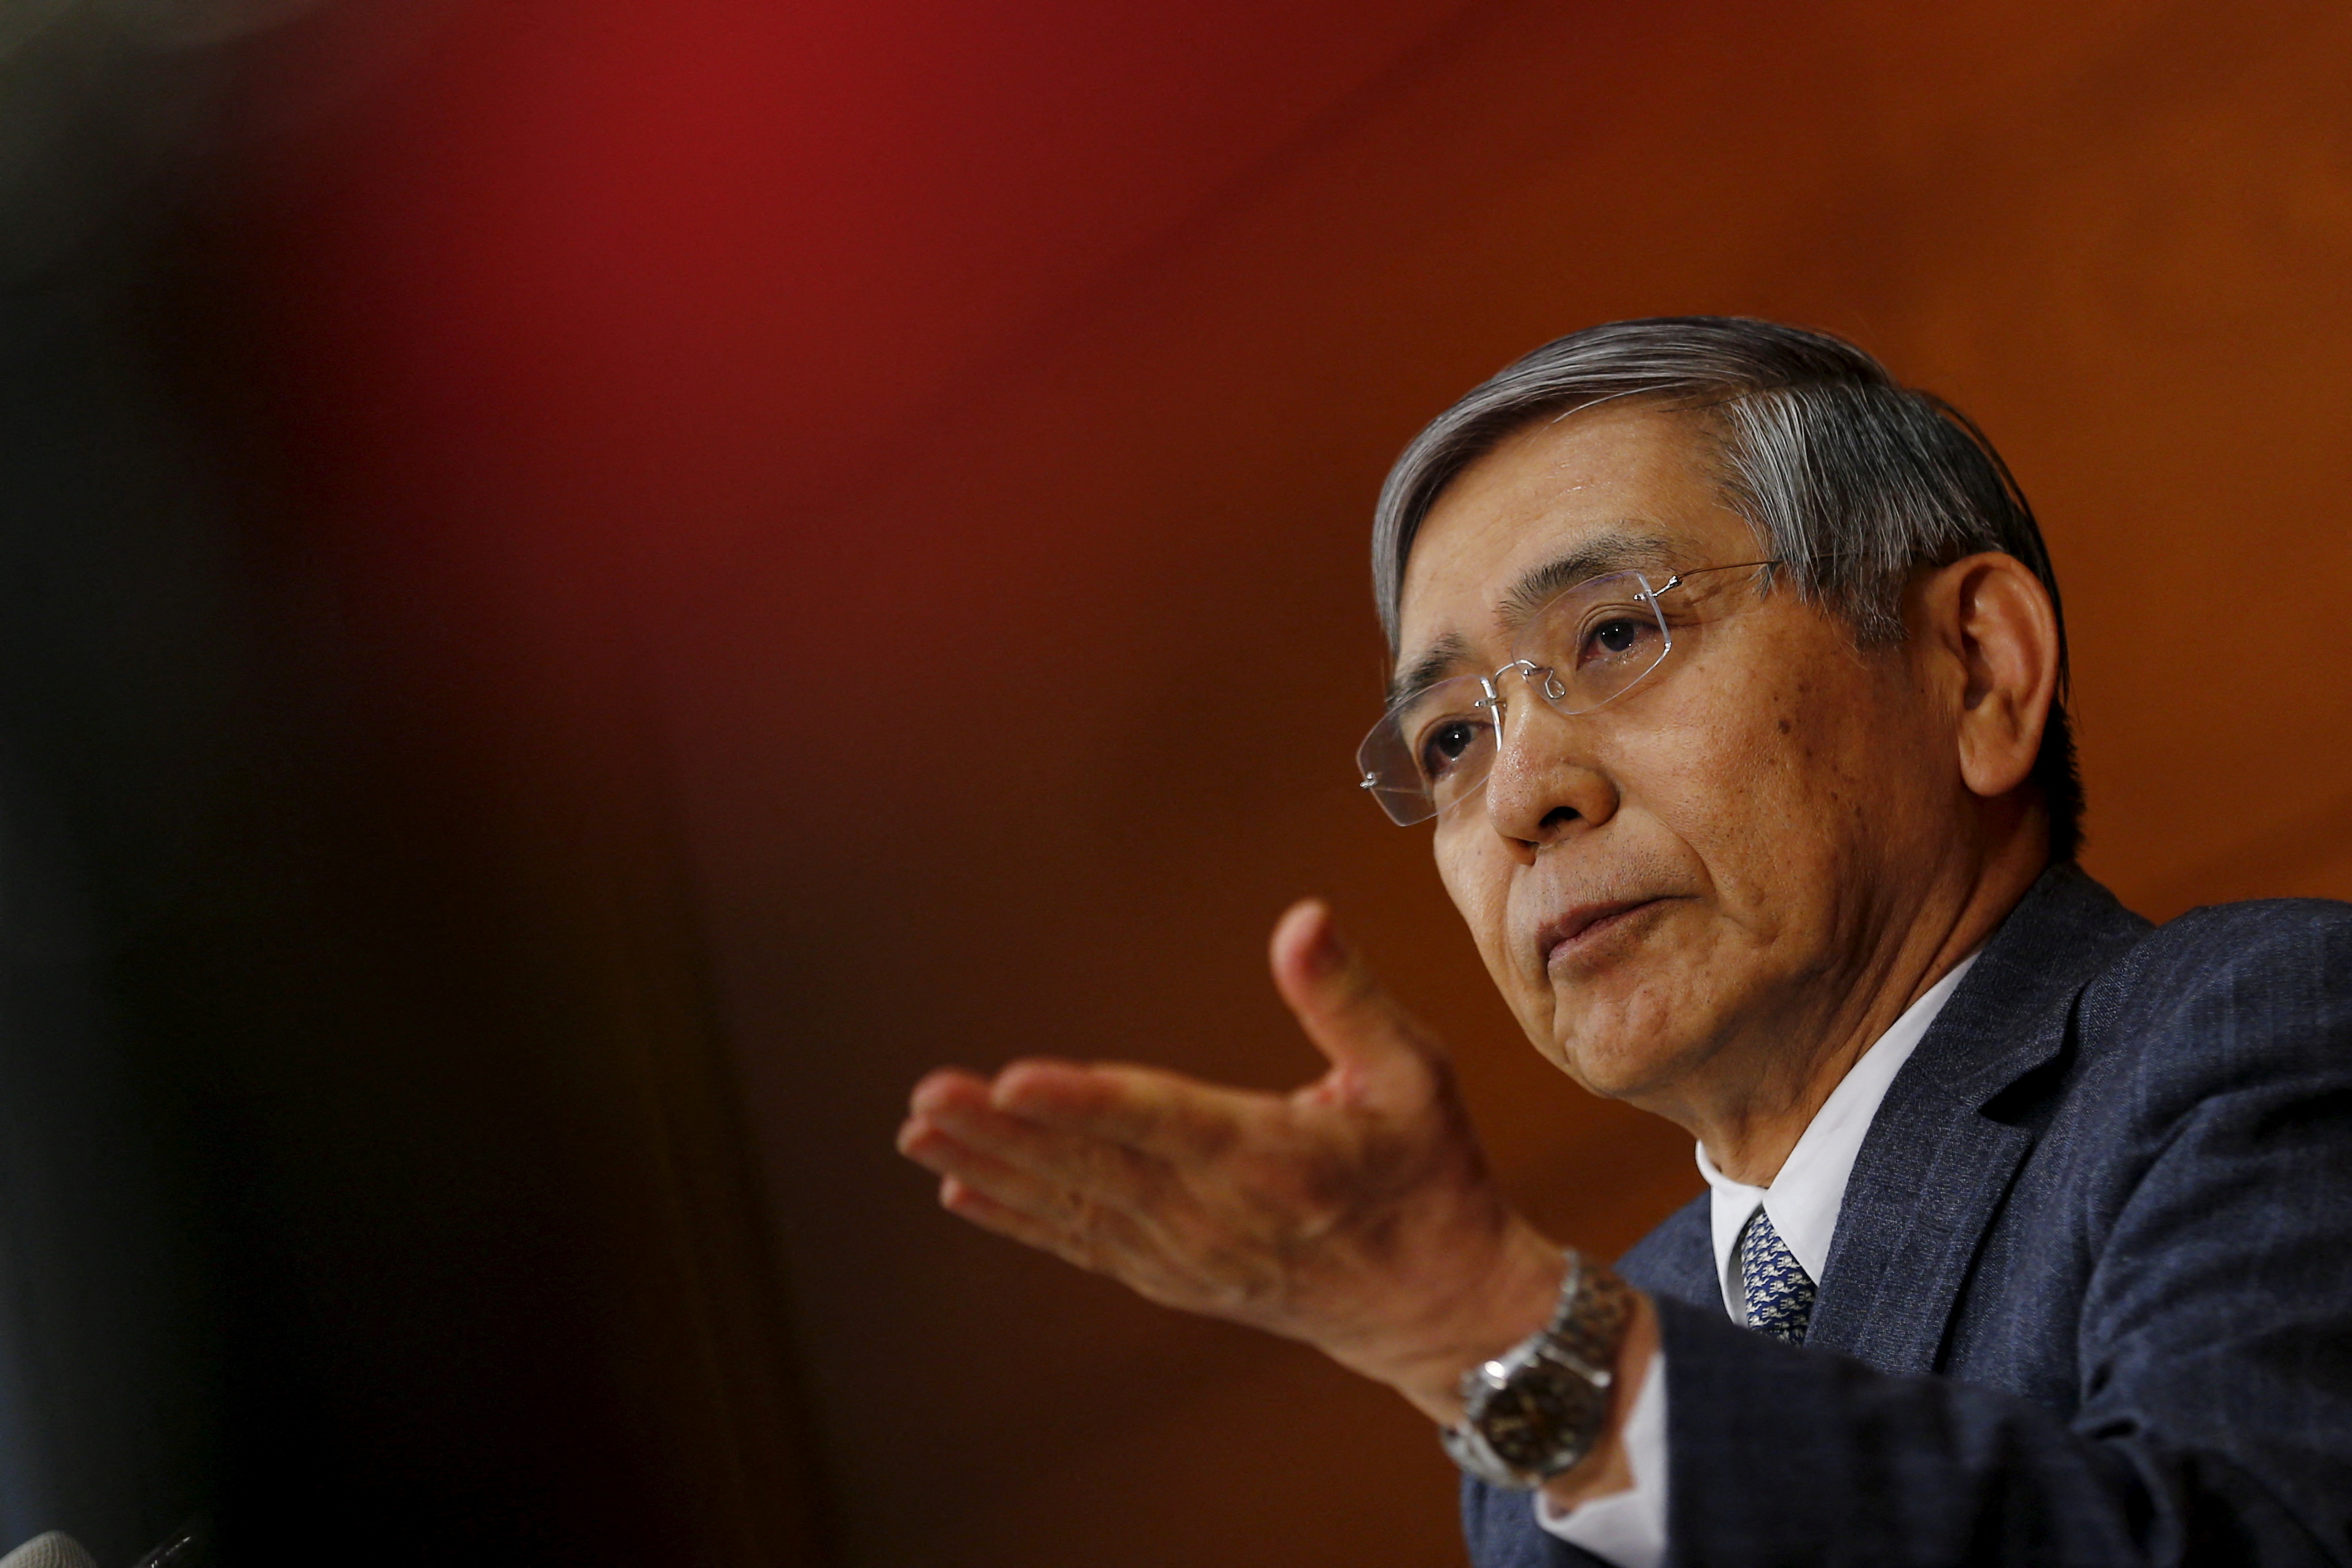 Bank of Japan (BOJ) Governor Haruhiko Kuroda takes a question during a news conference at the BOJ headquarters in Tokyo